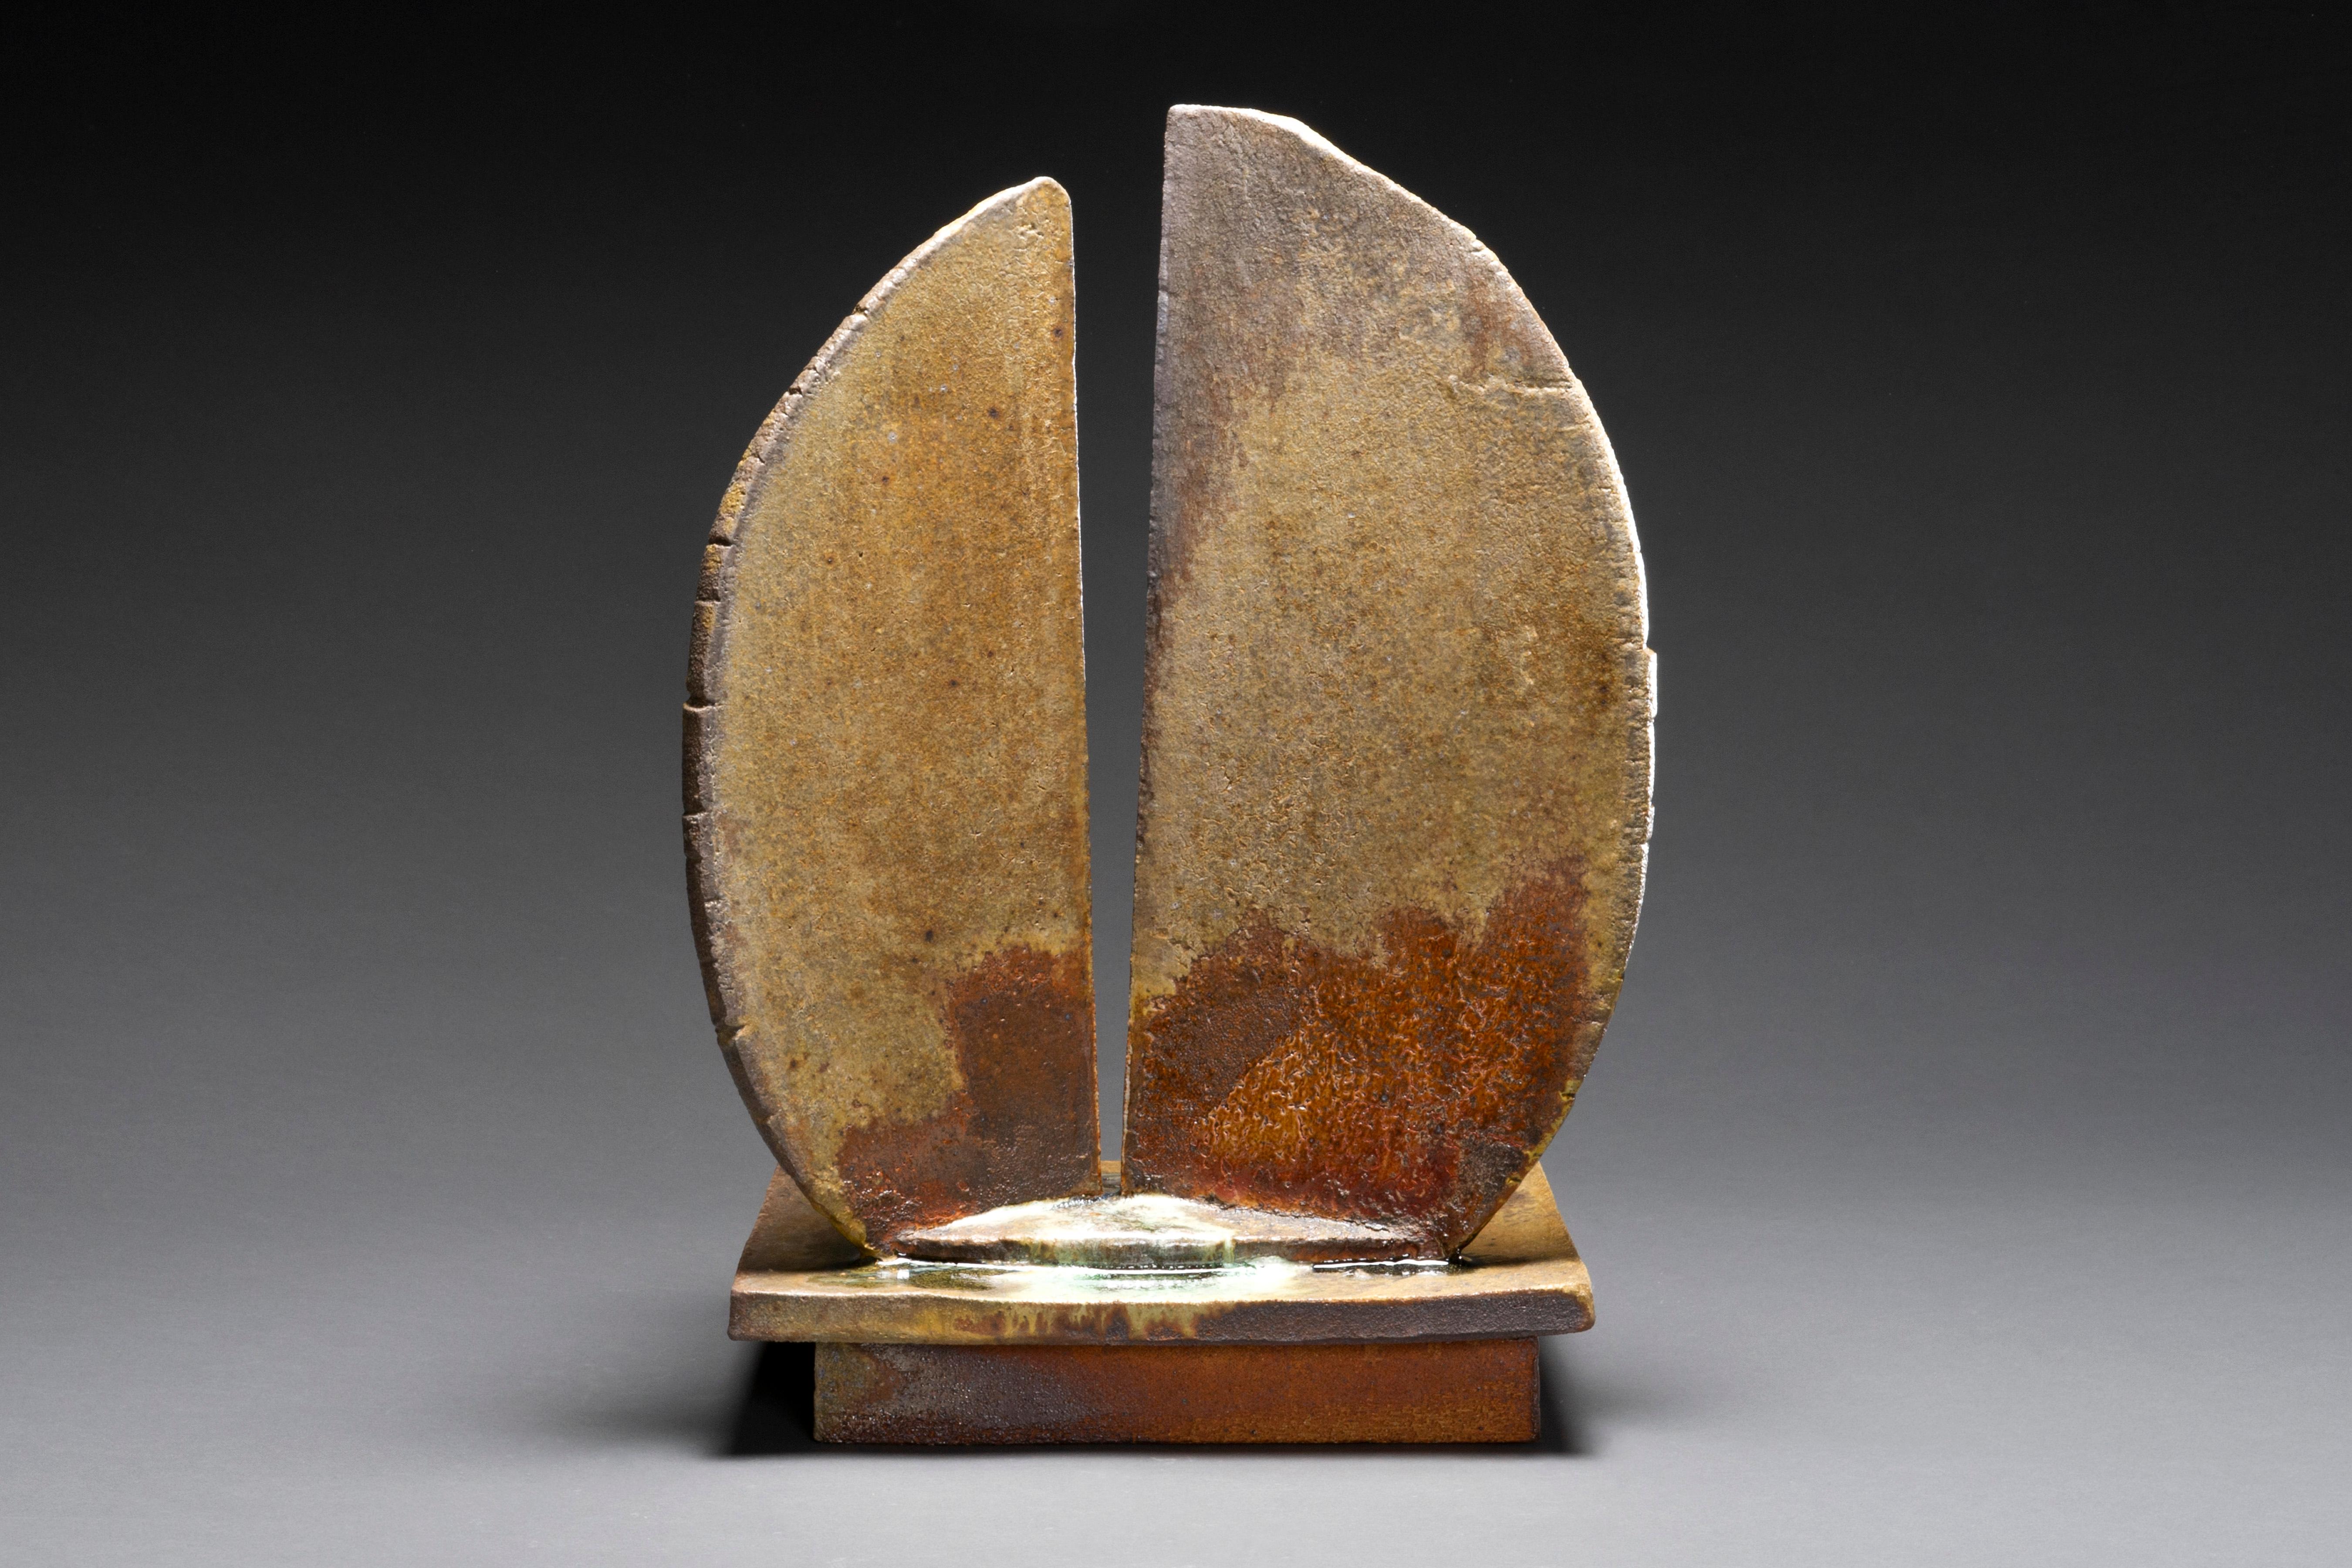 Wood-fired ceramic abstract sculpture: 'Four' - Sculpture by Tony Moore